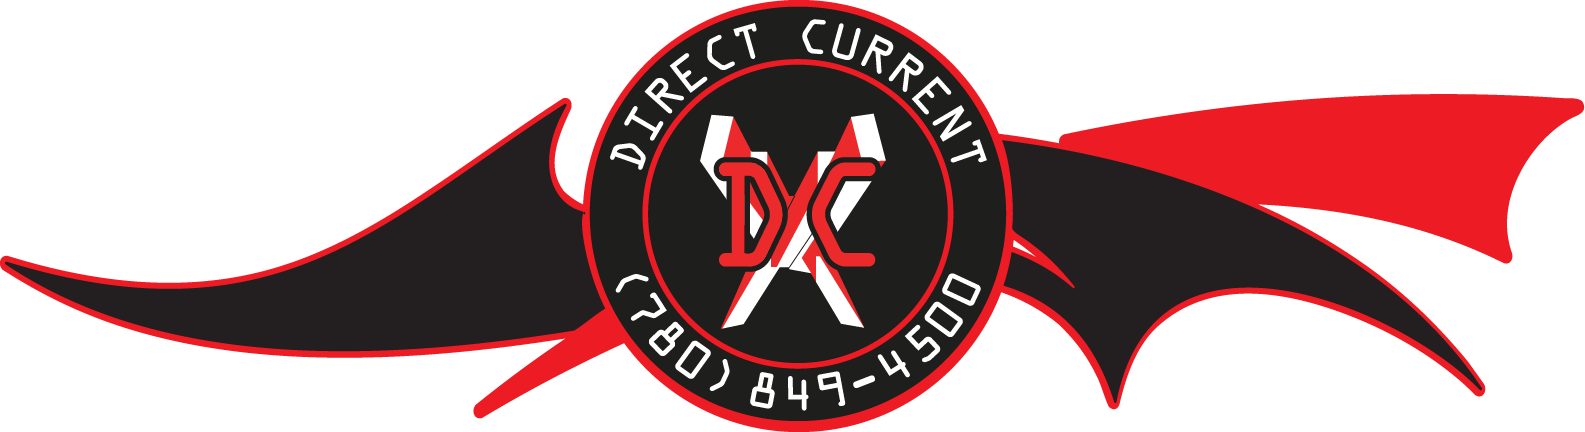 Direct Current Mobile & Electronics Inc.